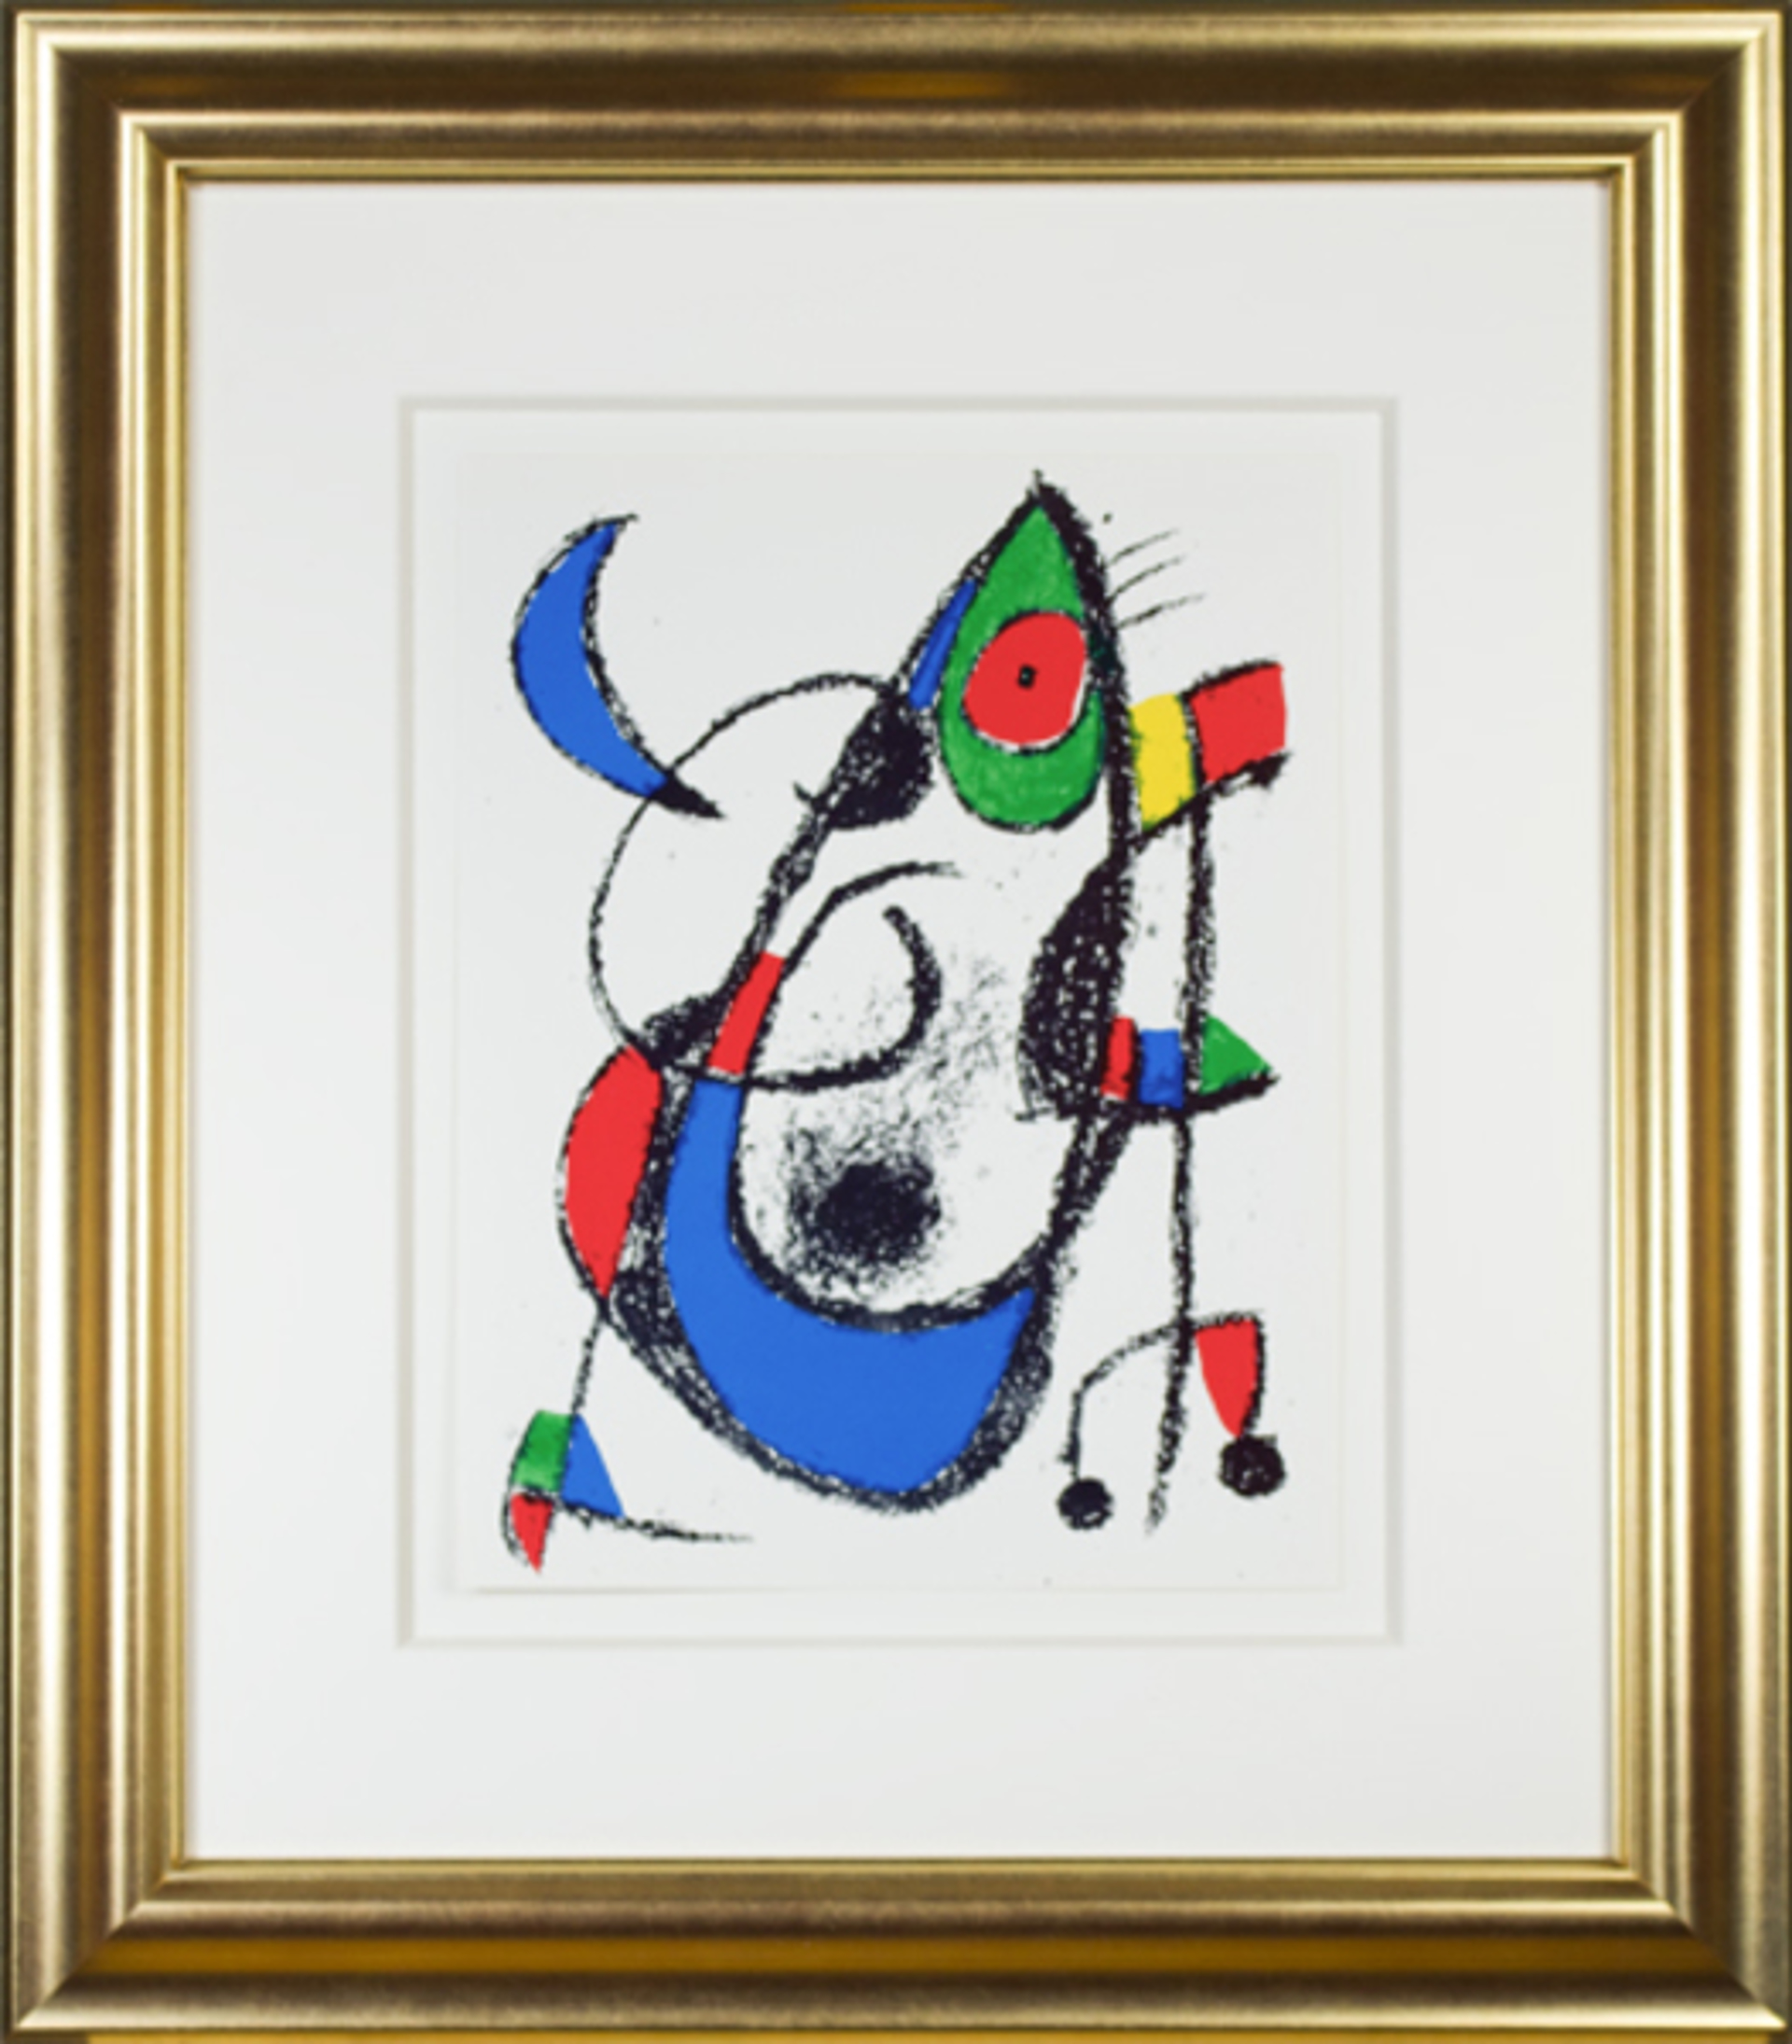 Original Lithograph XI from "Miro Lithographs II, Maeght Publisher" by Joan Miró